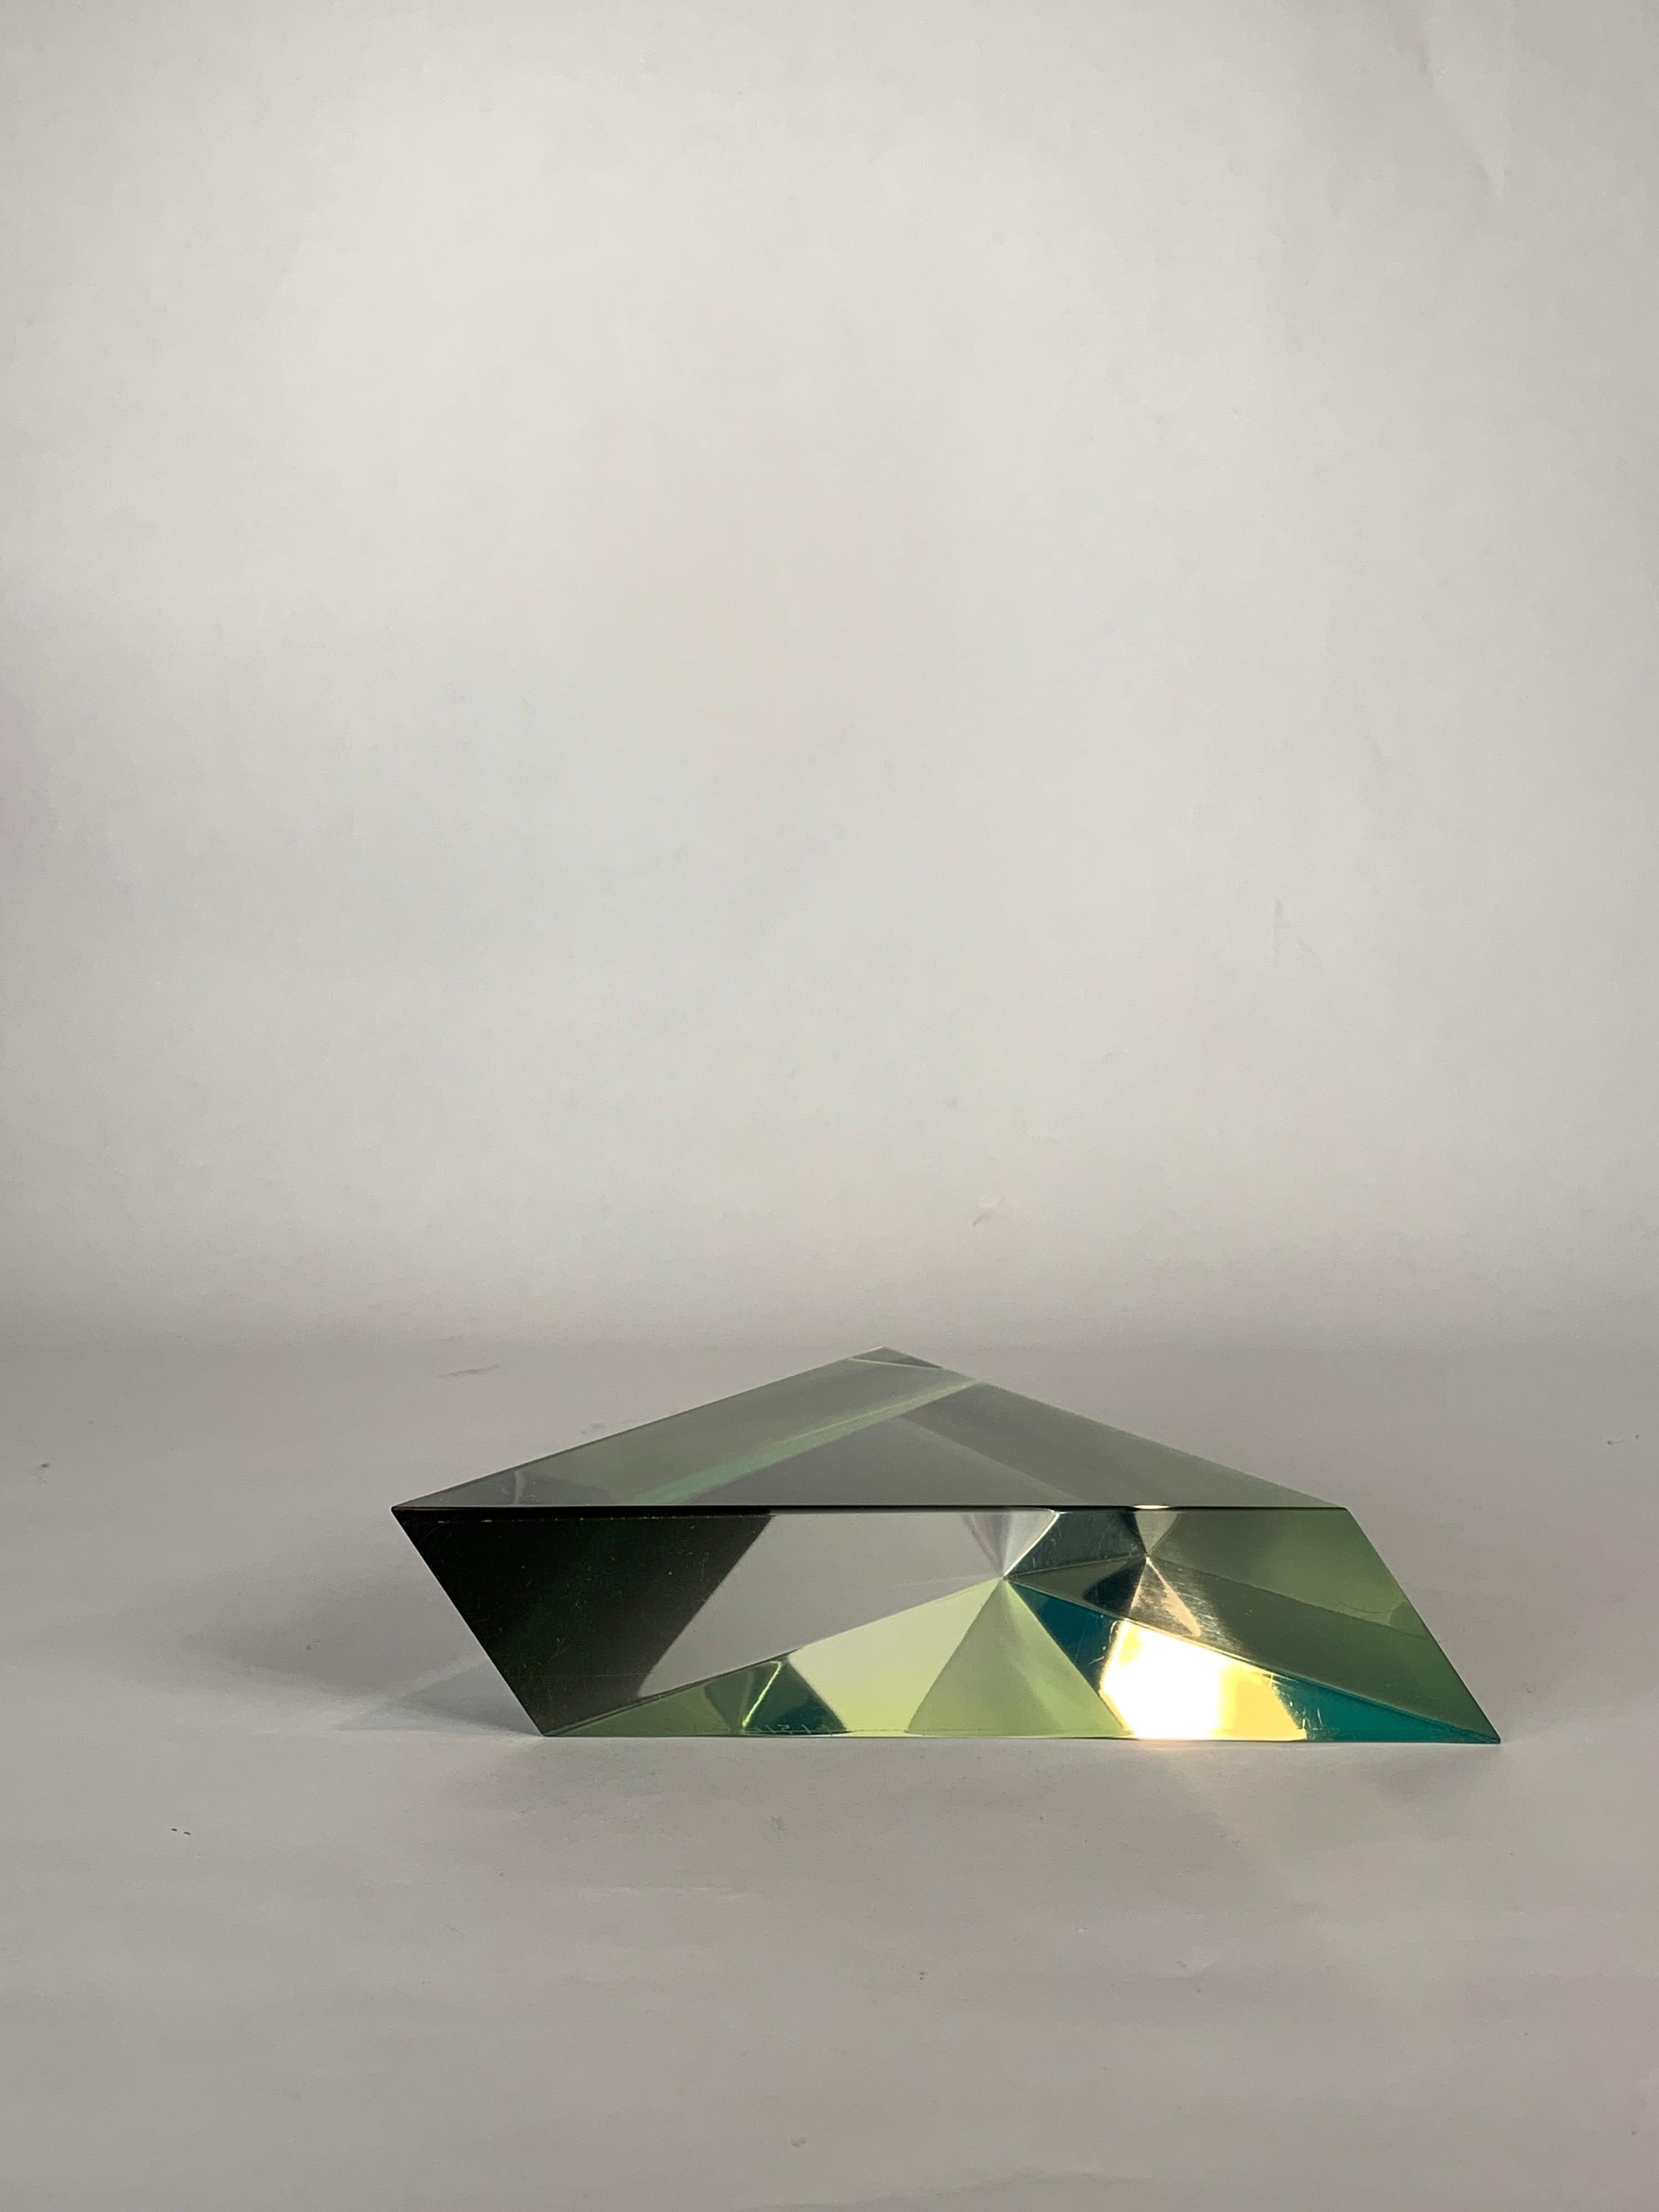 Pale green acrylic pyramid signed and dated 1981 sculpture by Vasa Velizar Mihich.